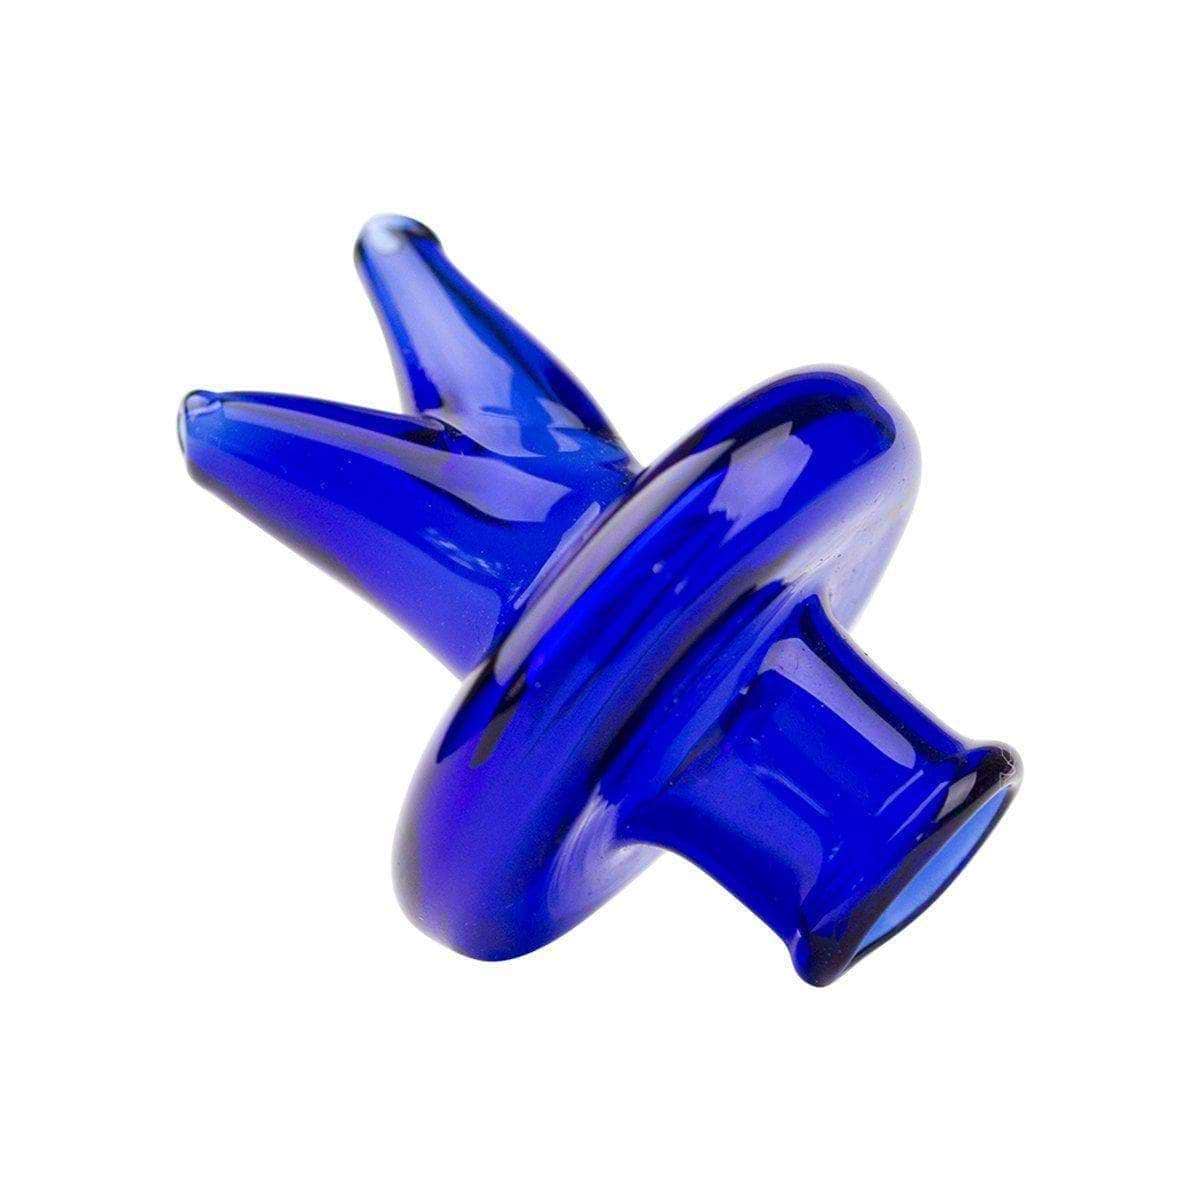 Blue Cool pocket-friendly carb cap made of smooth surface with split fork on the road shape and design